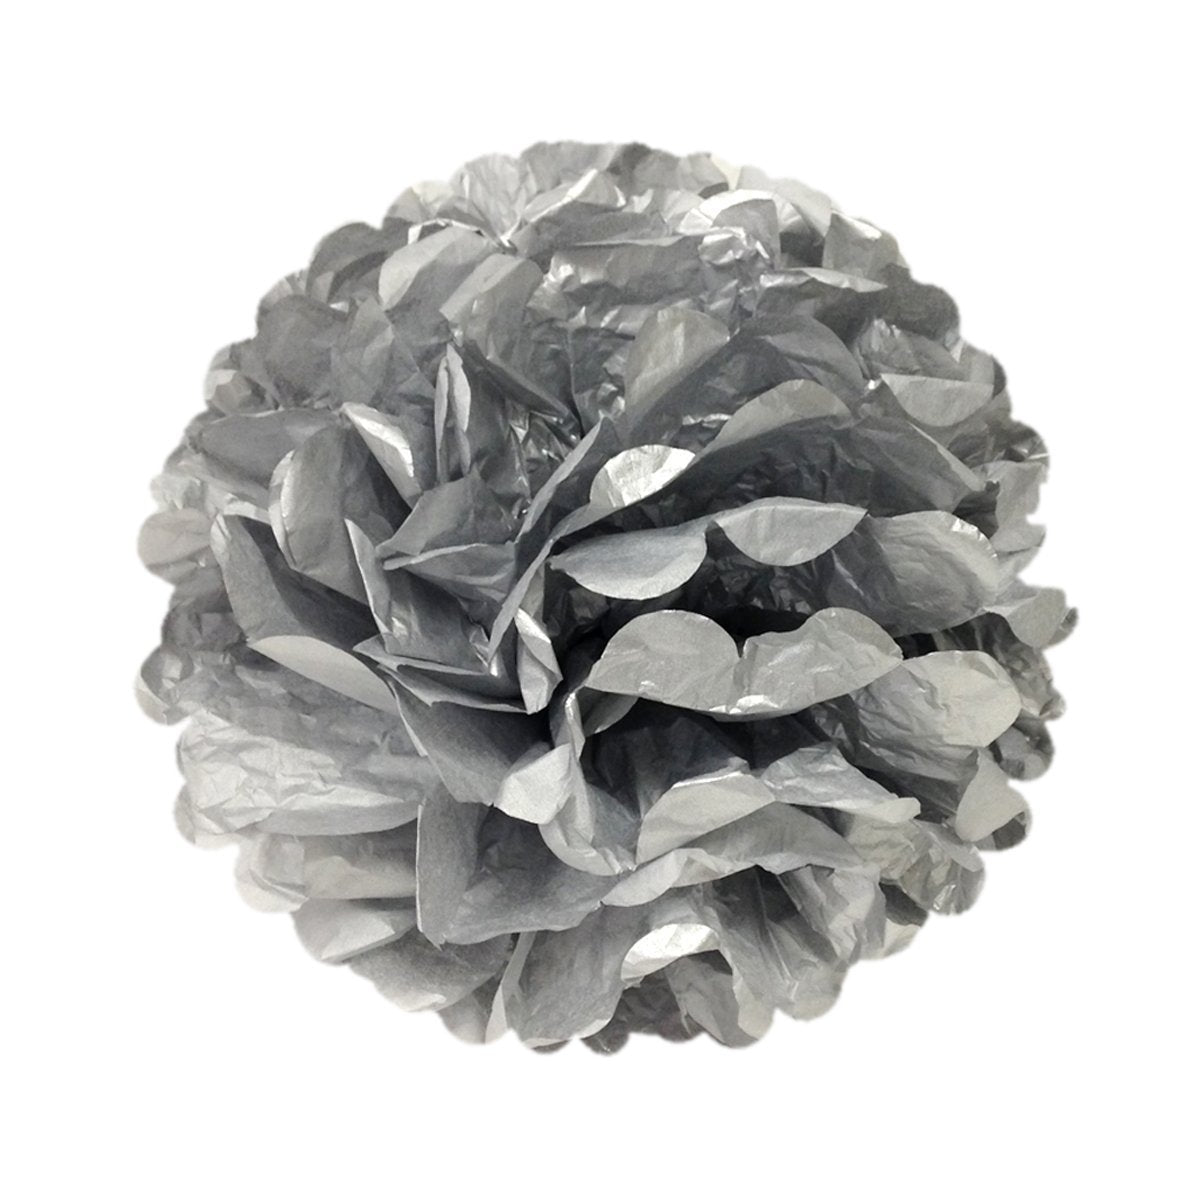 Wrapables Set of 9 Tissue Pom Pom Party Decorations, Black/Silver/Whit